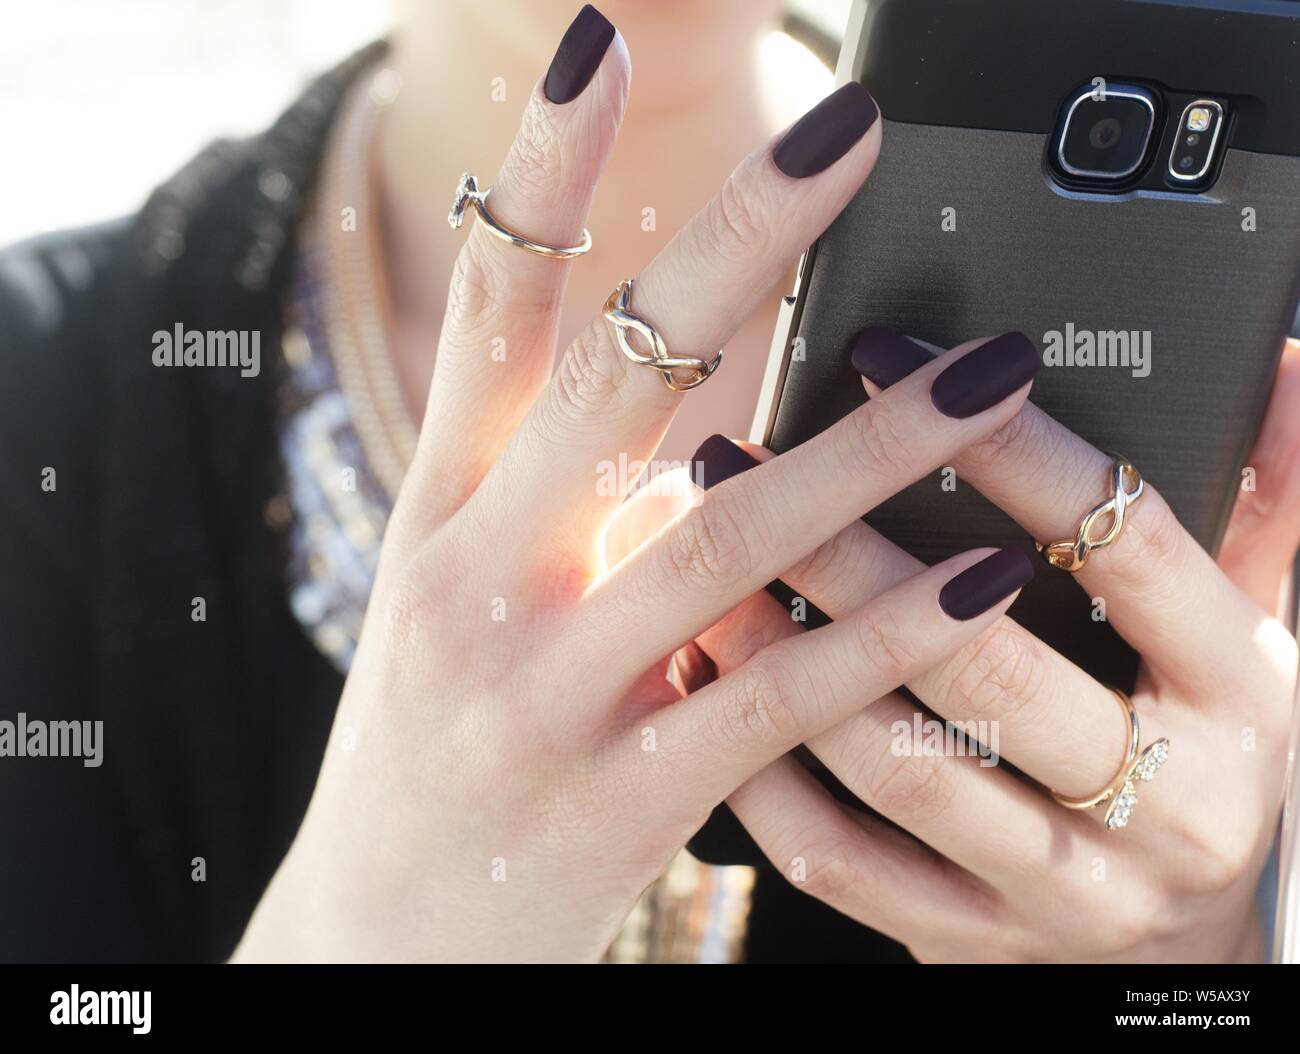 Female with black nail polish and chain-like rings holding a smartphone  Stock Photo - Alamy